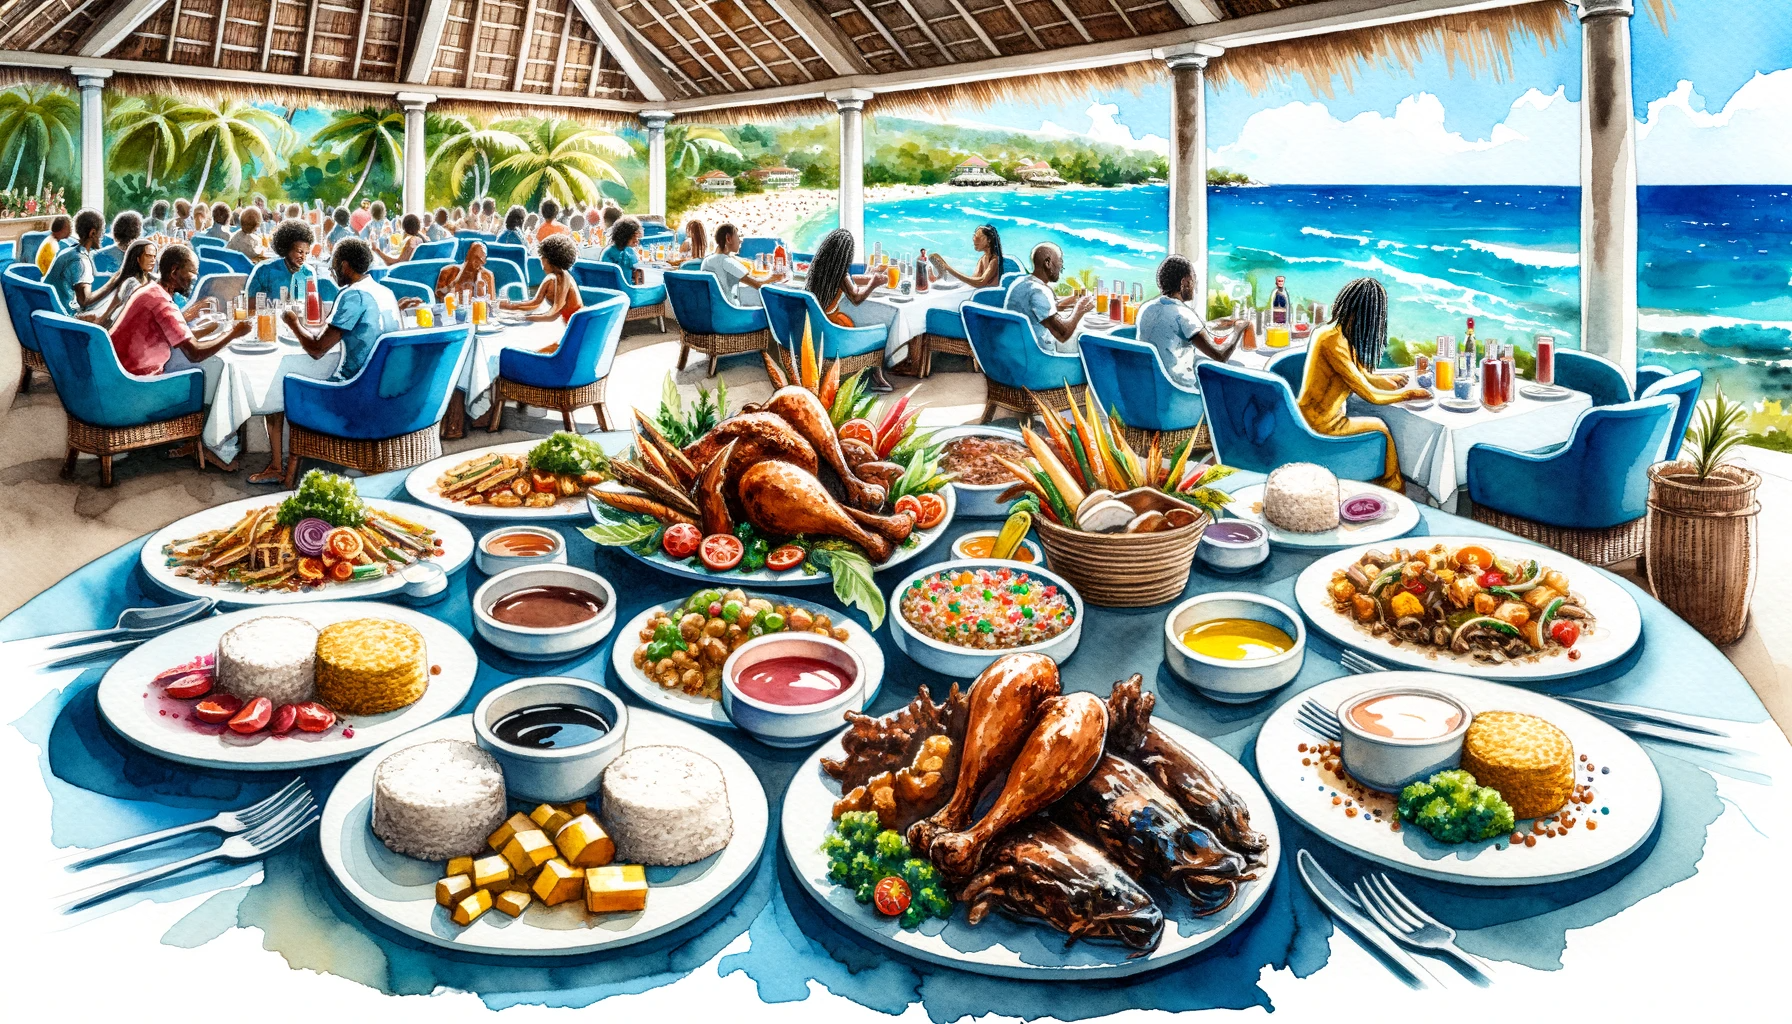 A Taste of Jamaica: Traditional Dishes Served at 7 Restaurant